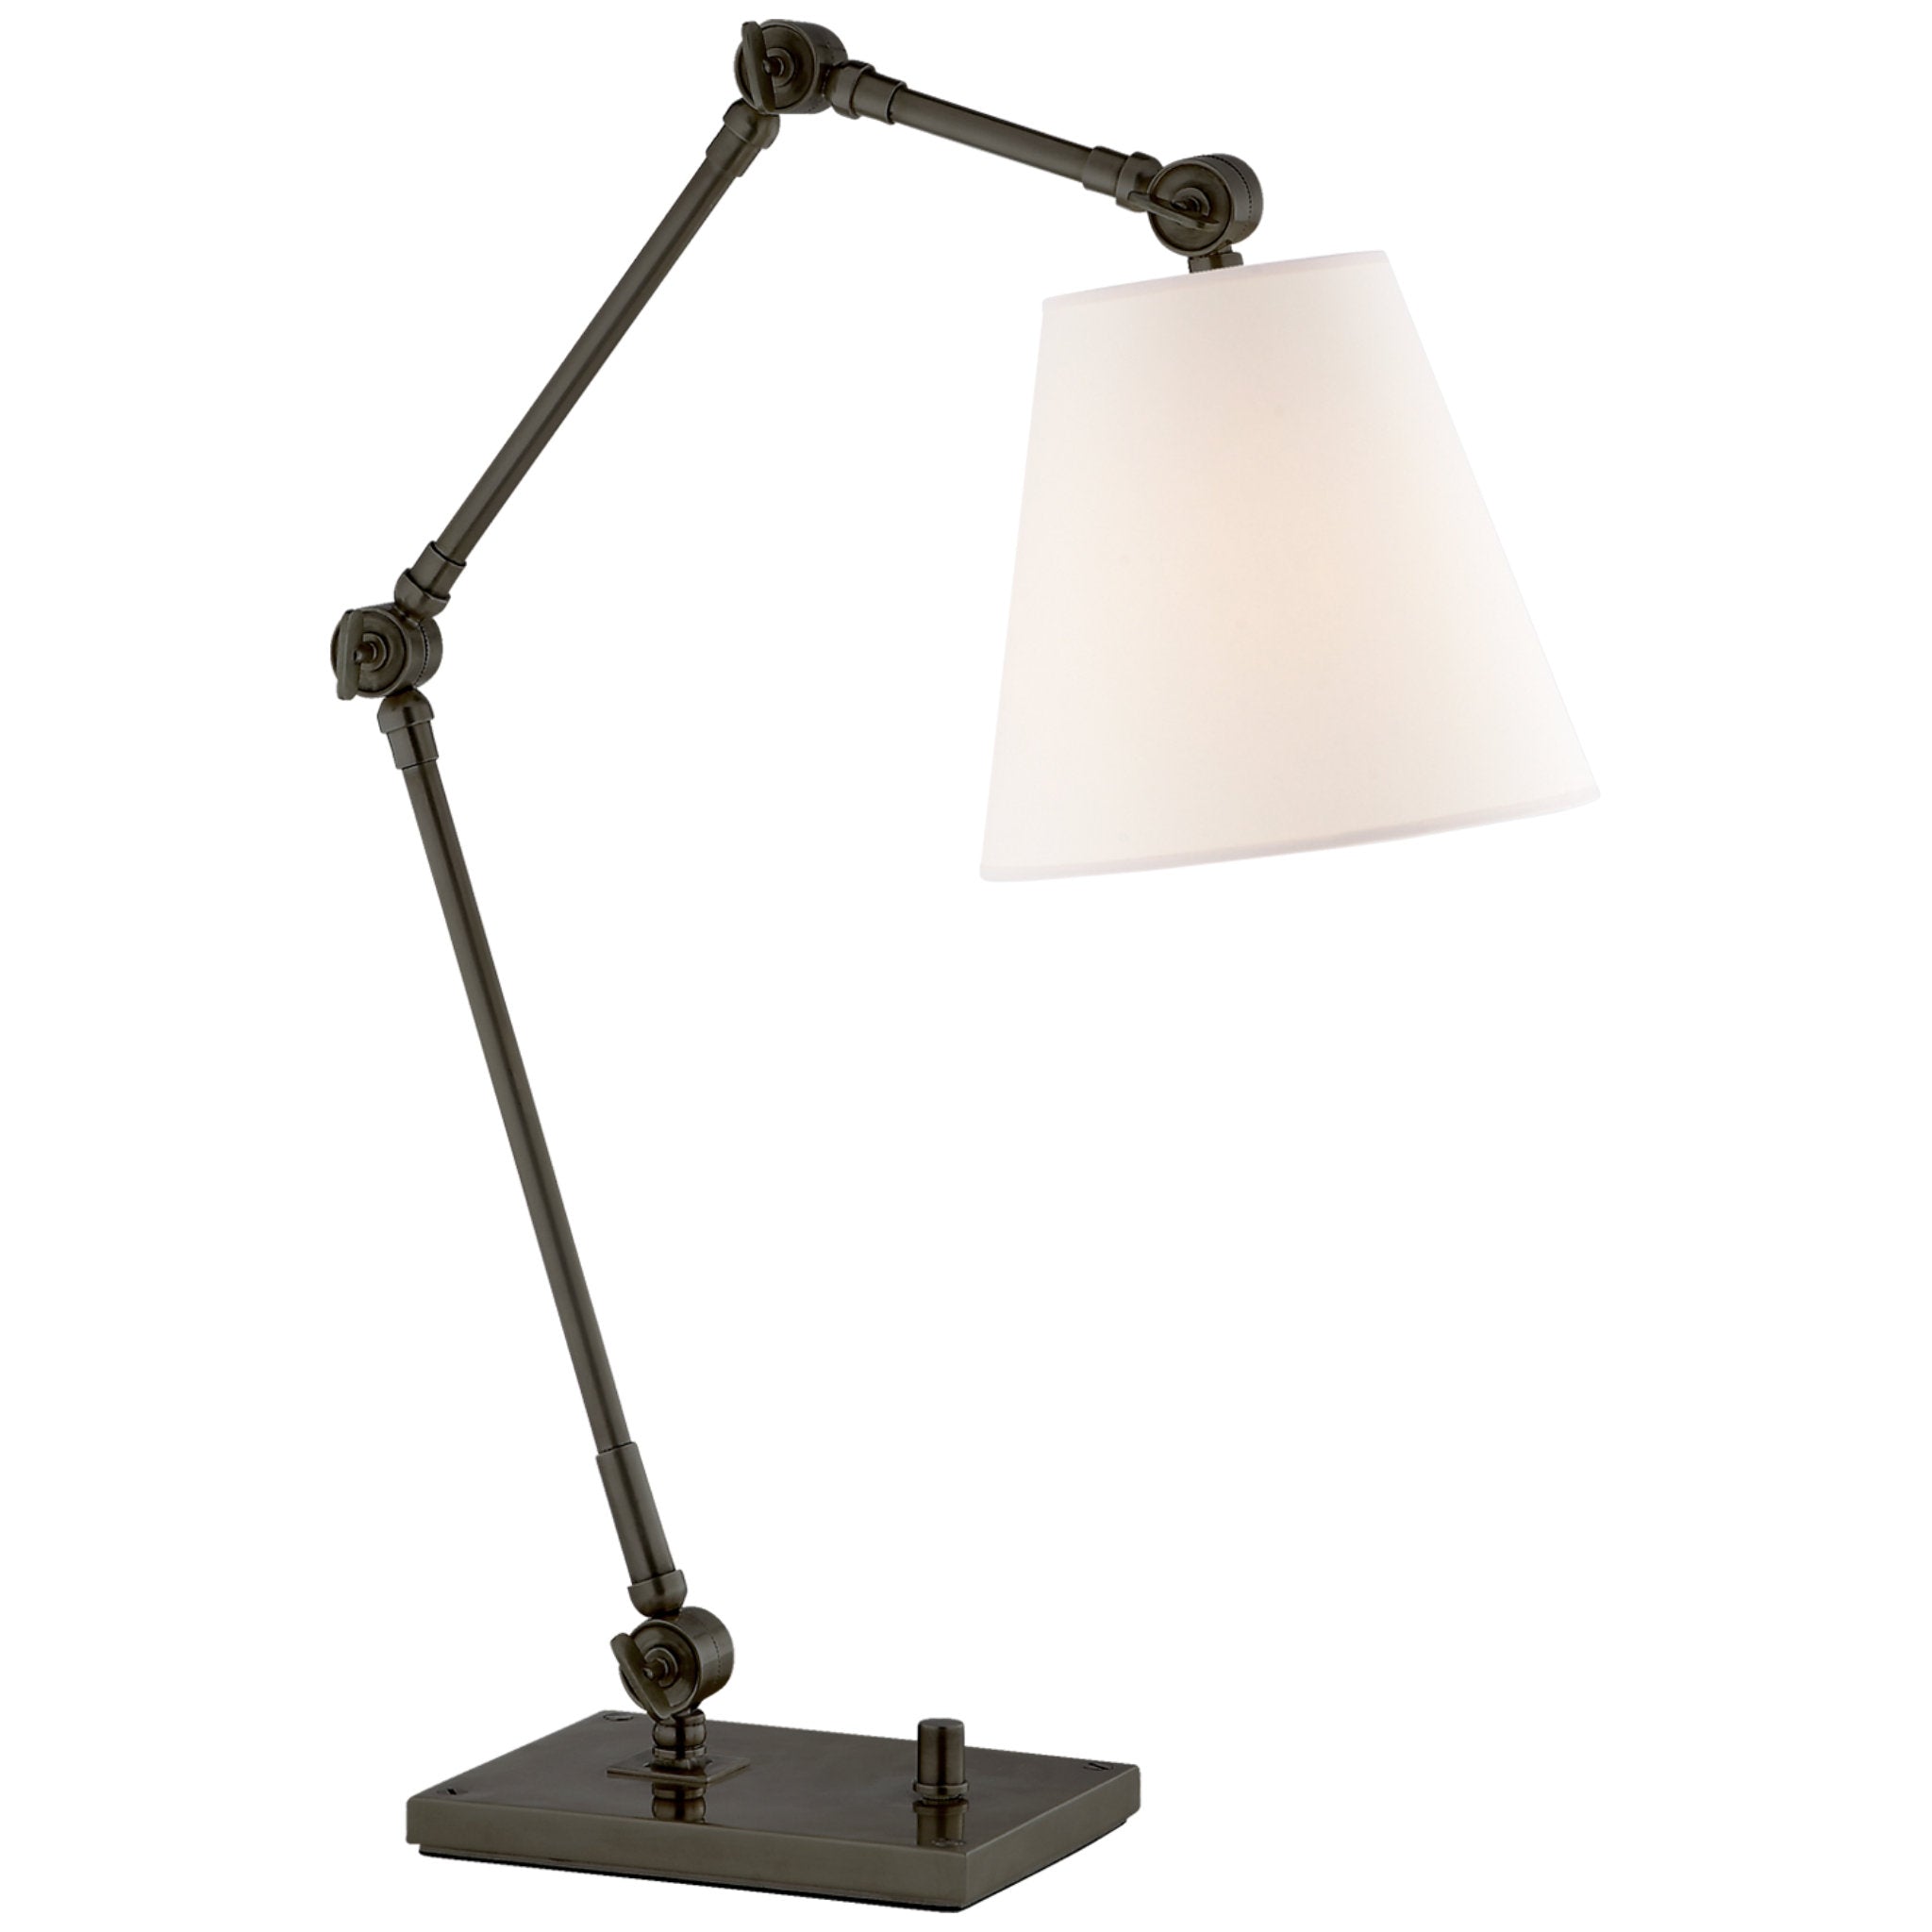 Suzanne Kasler Graves Task Lamp in Bronze with Linen Shade